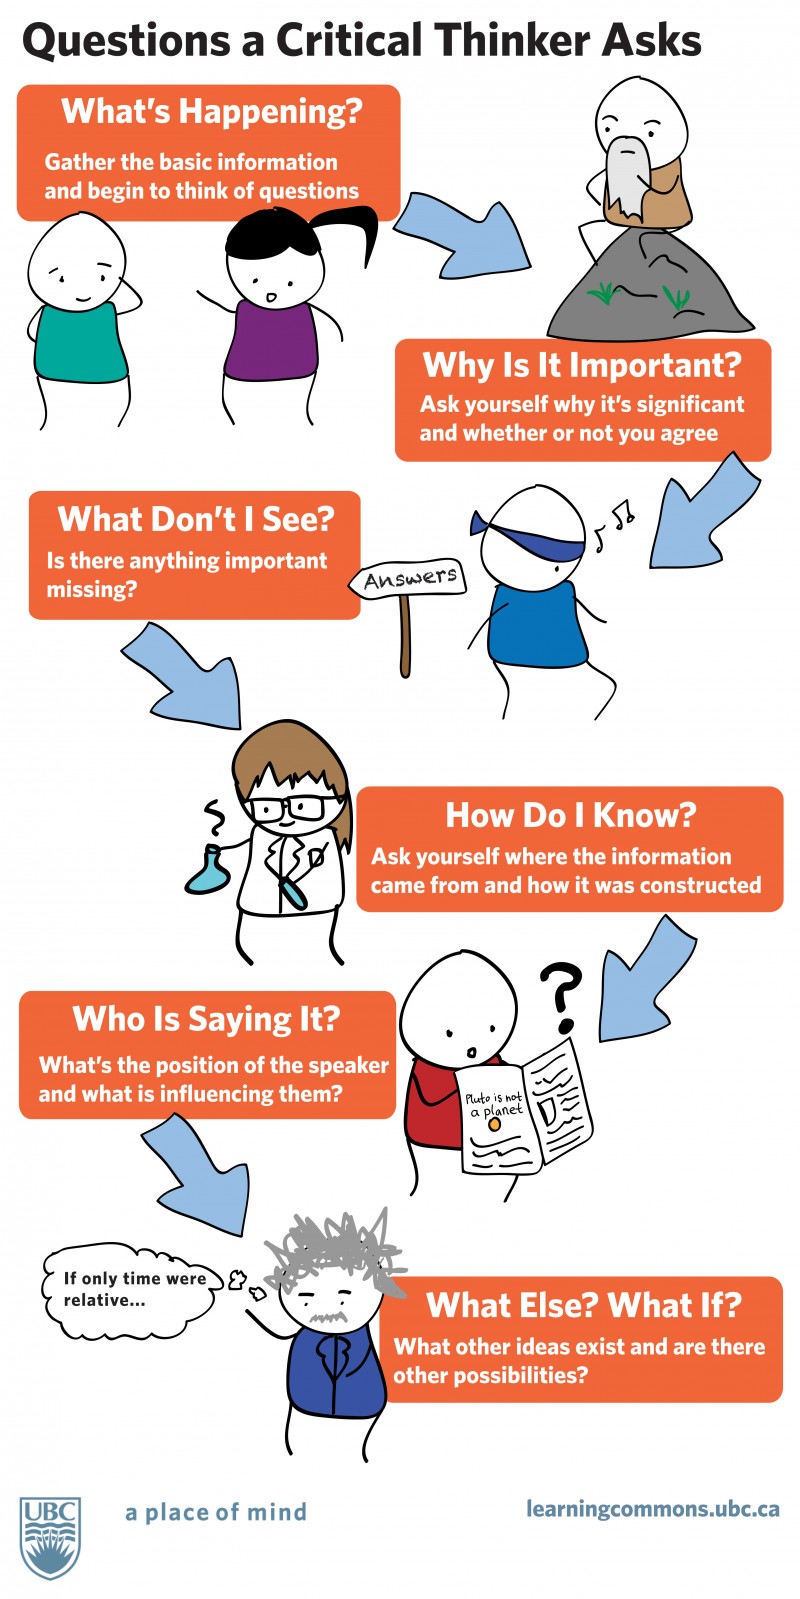 Infographic titled "Questions a Critical Thinker Asks." From the top, text reads: What's Happening? Gather the basic information and begin to think of questions (image of two stick figures talking to each other). Why is it Important? Ask yourself why it's significant and whether or not you agree. (Image of bearded stick figure sitting on a rock.) What Don't I See? Is there anything important missing? (Image of stick figure wearing a blindfold, whistling, walking away from a sign labeled Answers.) How Do I Know? Ask yourself where the information came from and how it was constructed. (Image of stick figure in a lab coat, glasses, holding a beaker.) Who is Saying It? What's the position of the speaker and what is influencing them? (Image of stick figure reading a newspaper.) What Else? What If? What other ideas exist and are there other possibilities? (Stick figure version of Albert Einstein with a thought bubble saying "If only time were relative...".